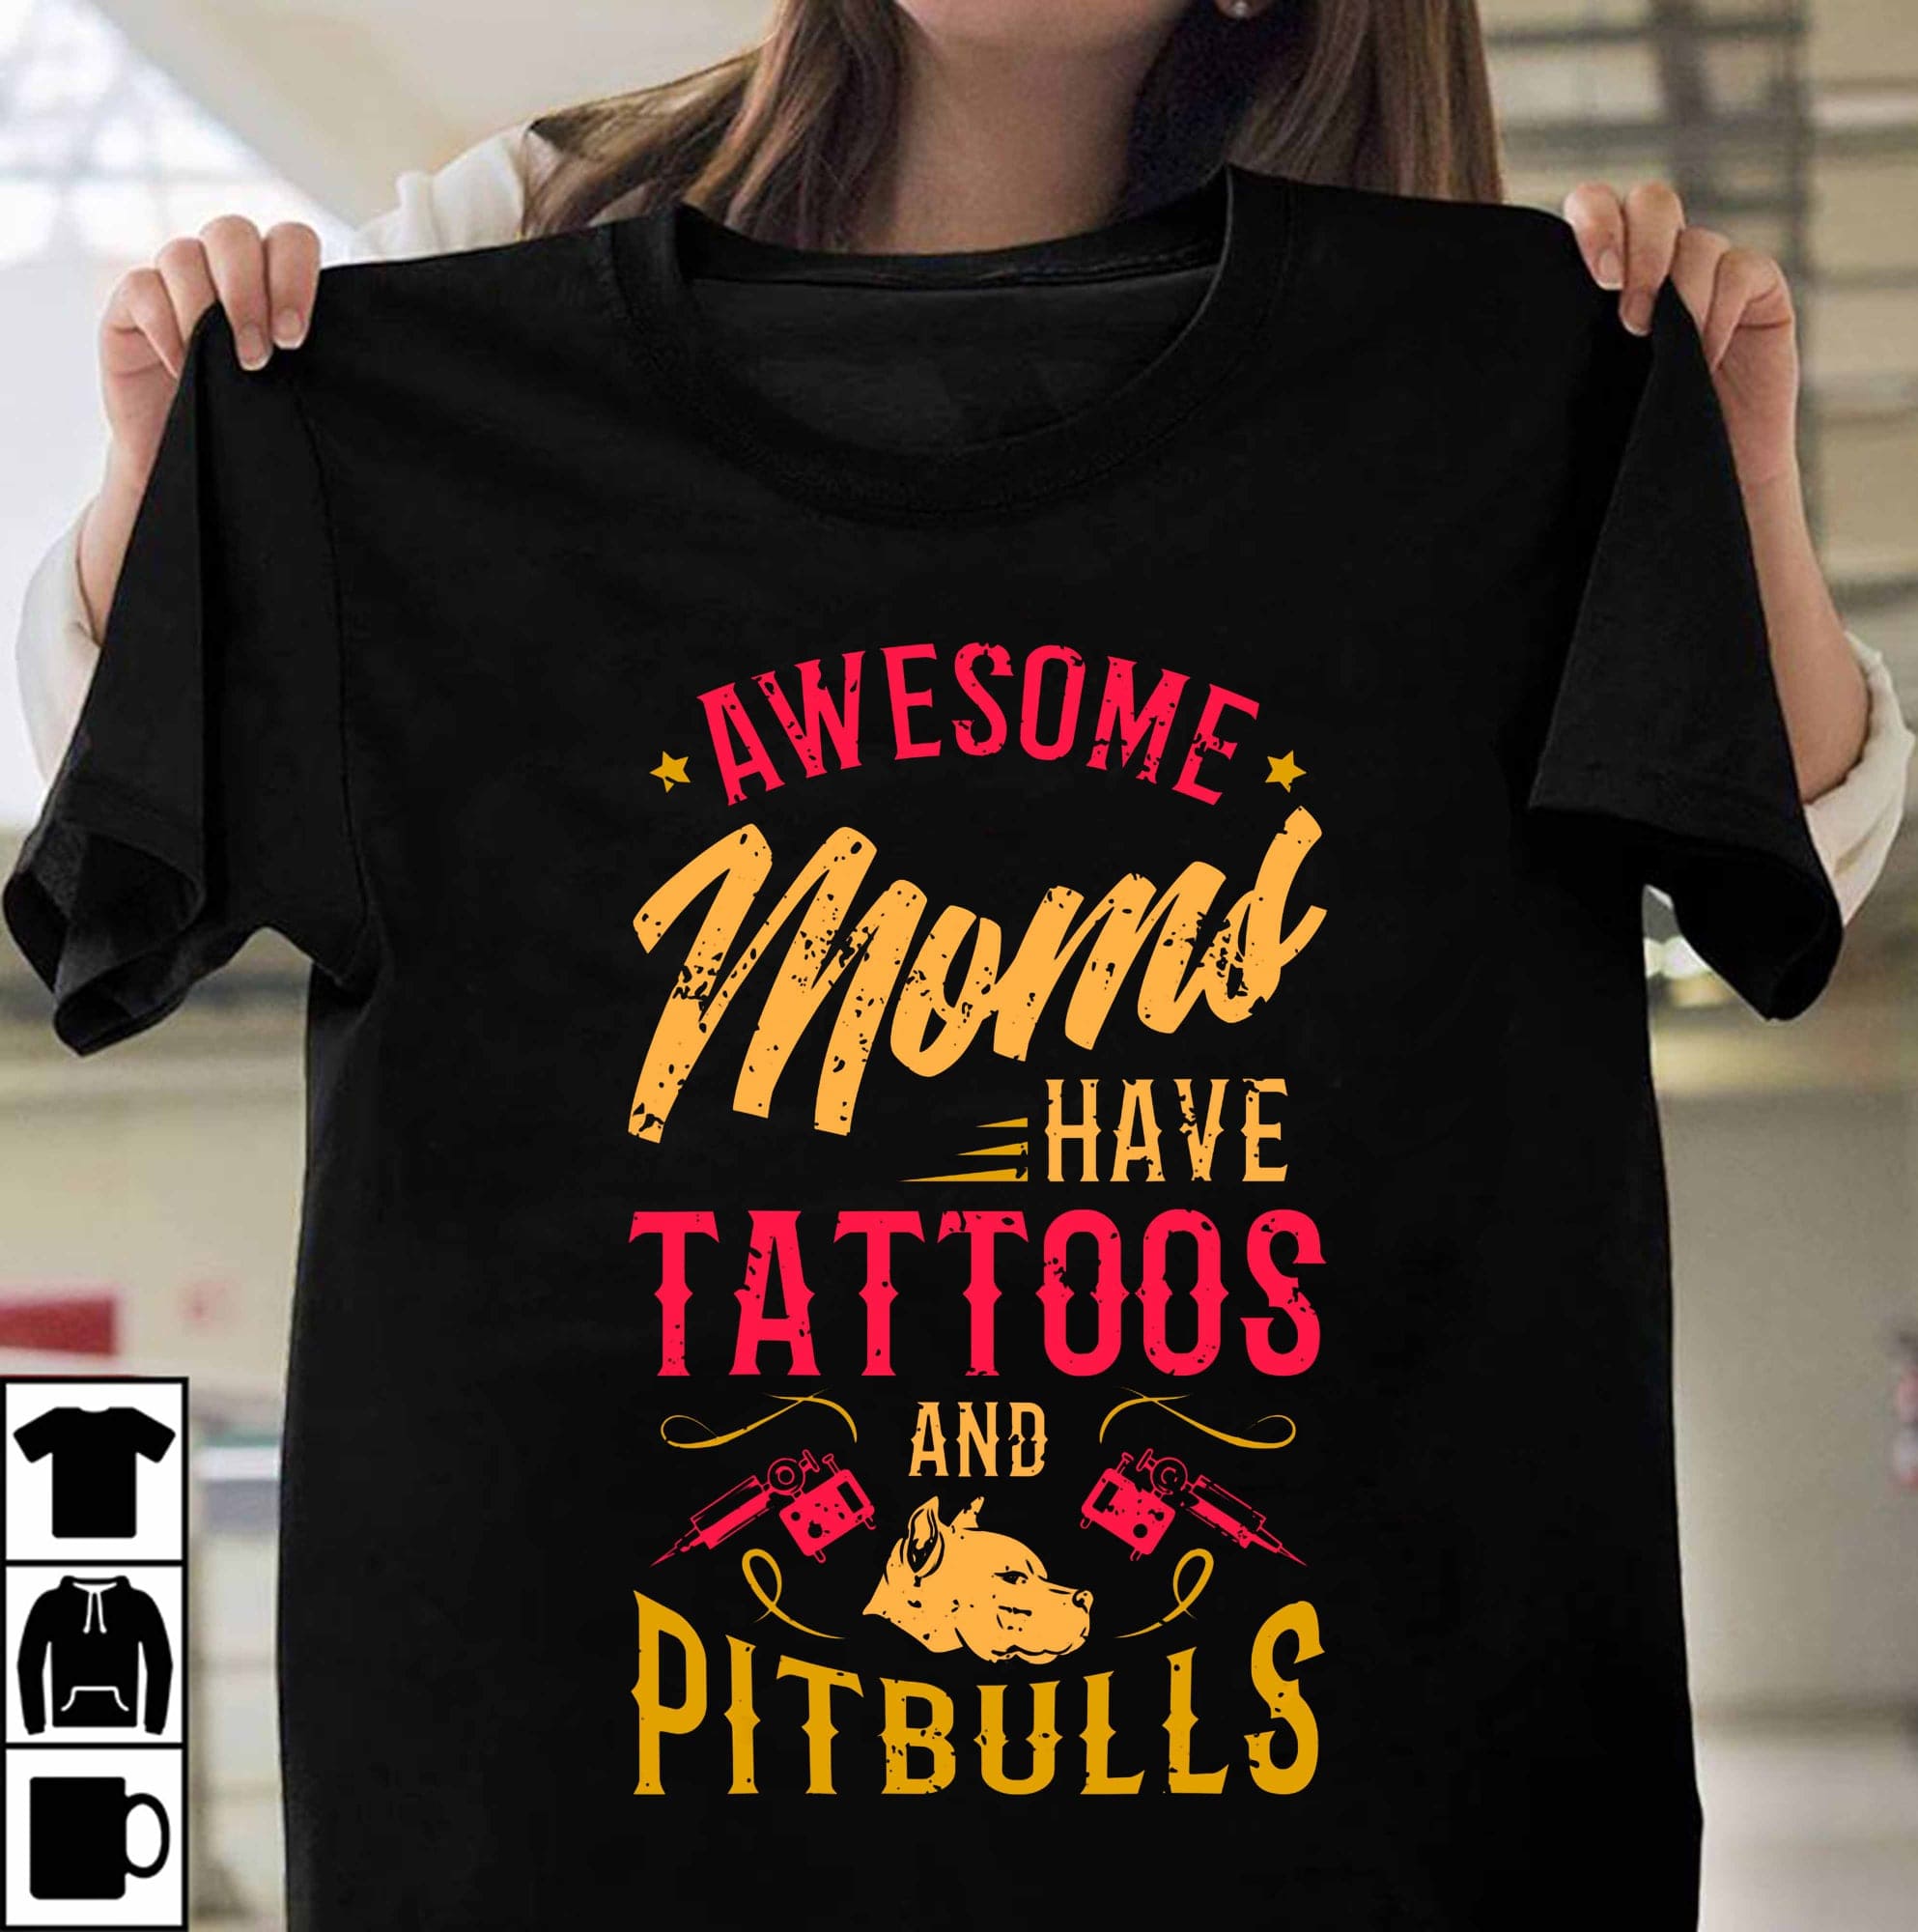 Awesome moms have tattoos and Pitbulls - Tattooed mother, gift for dog mom